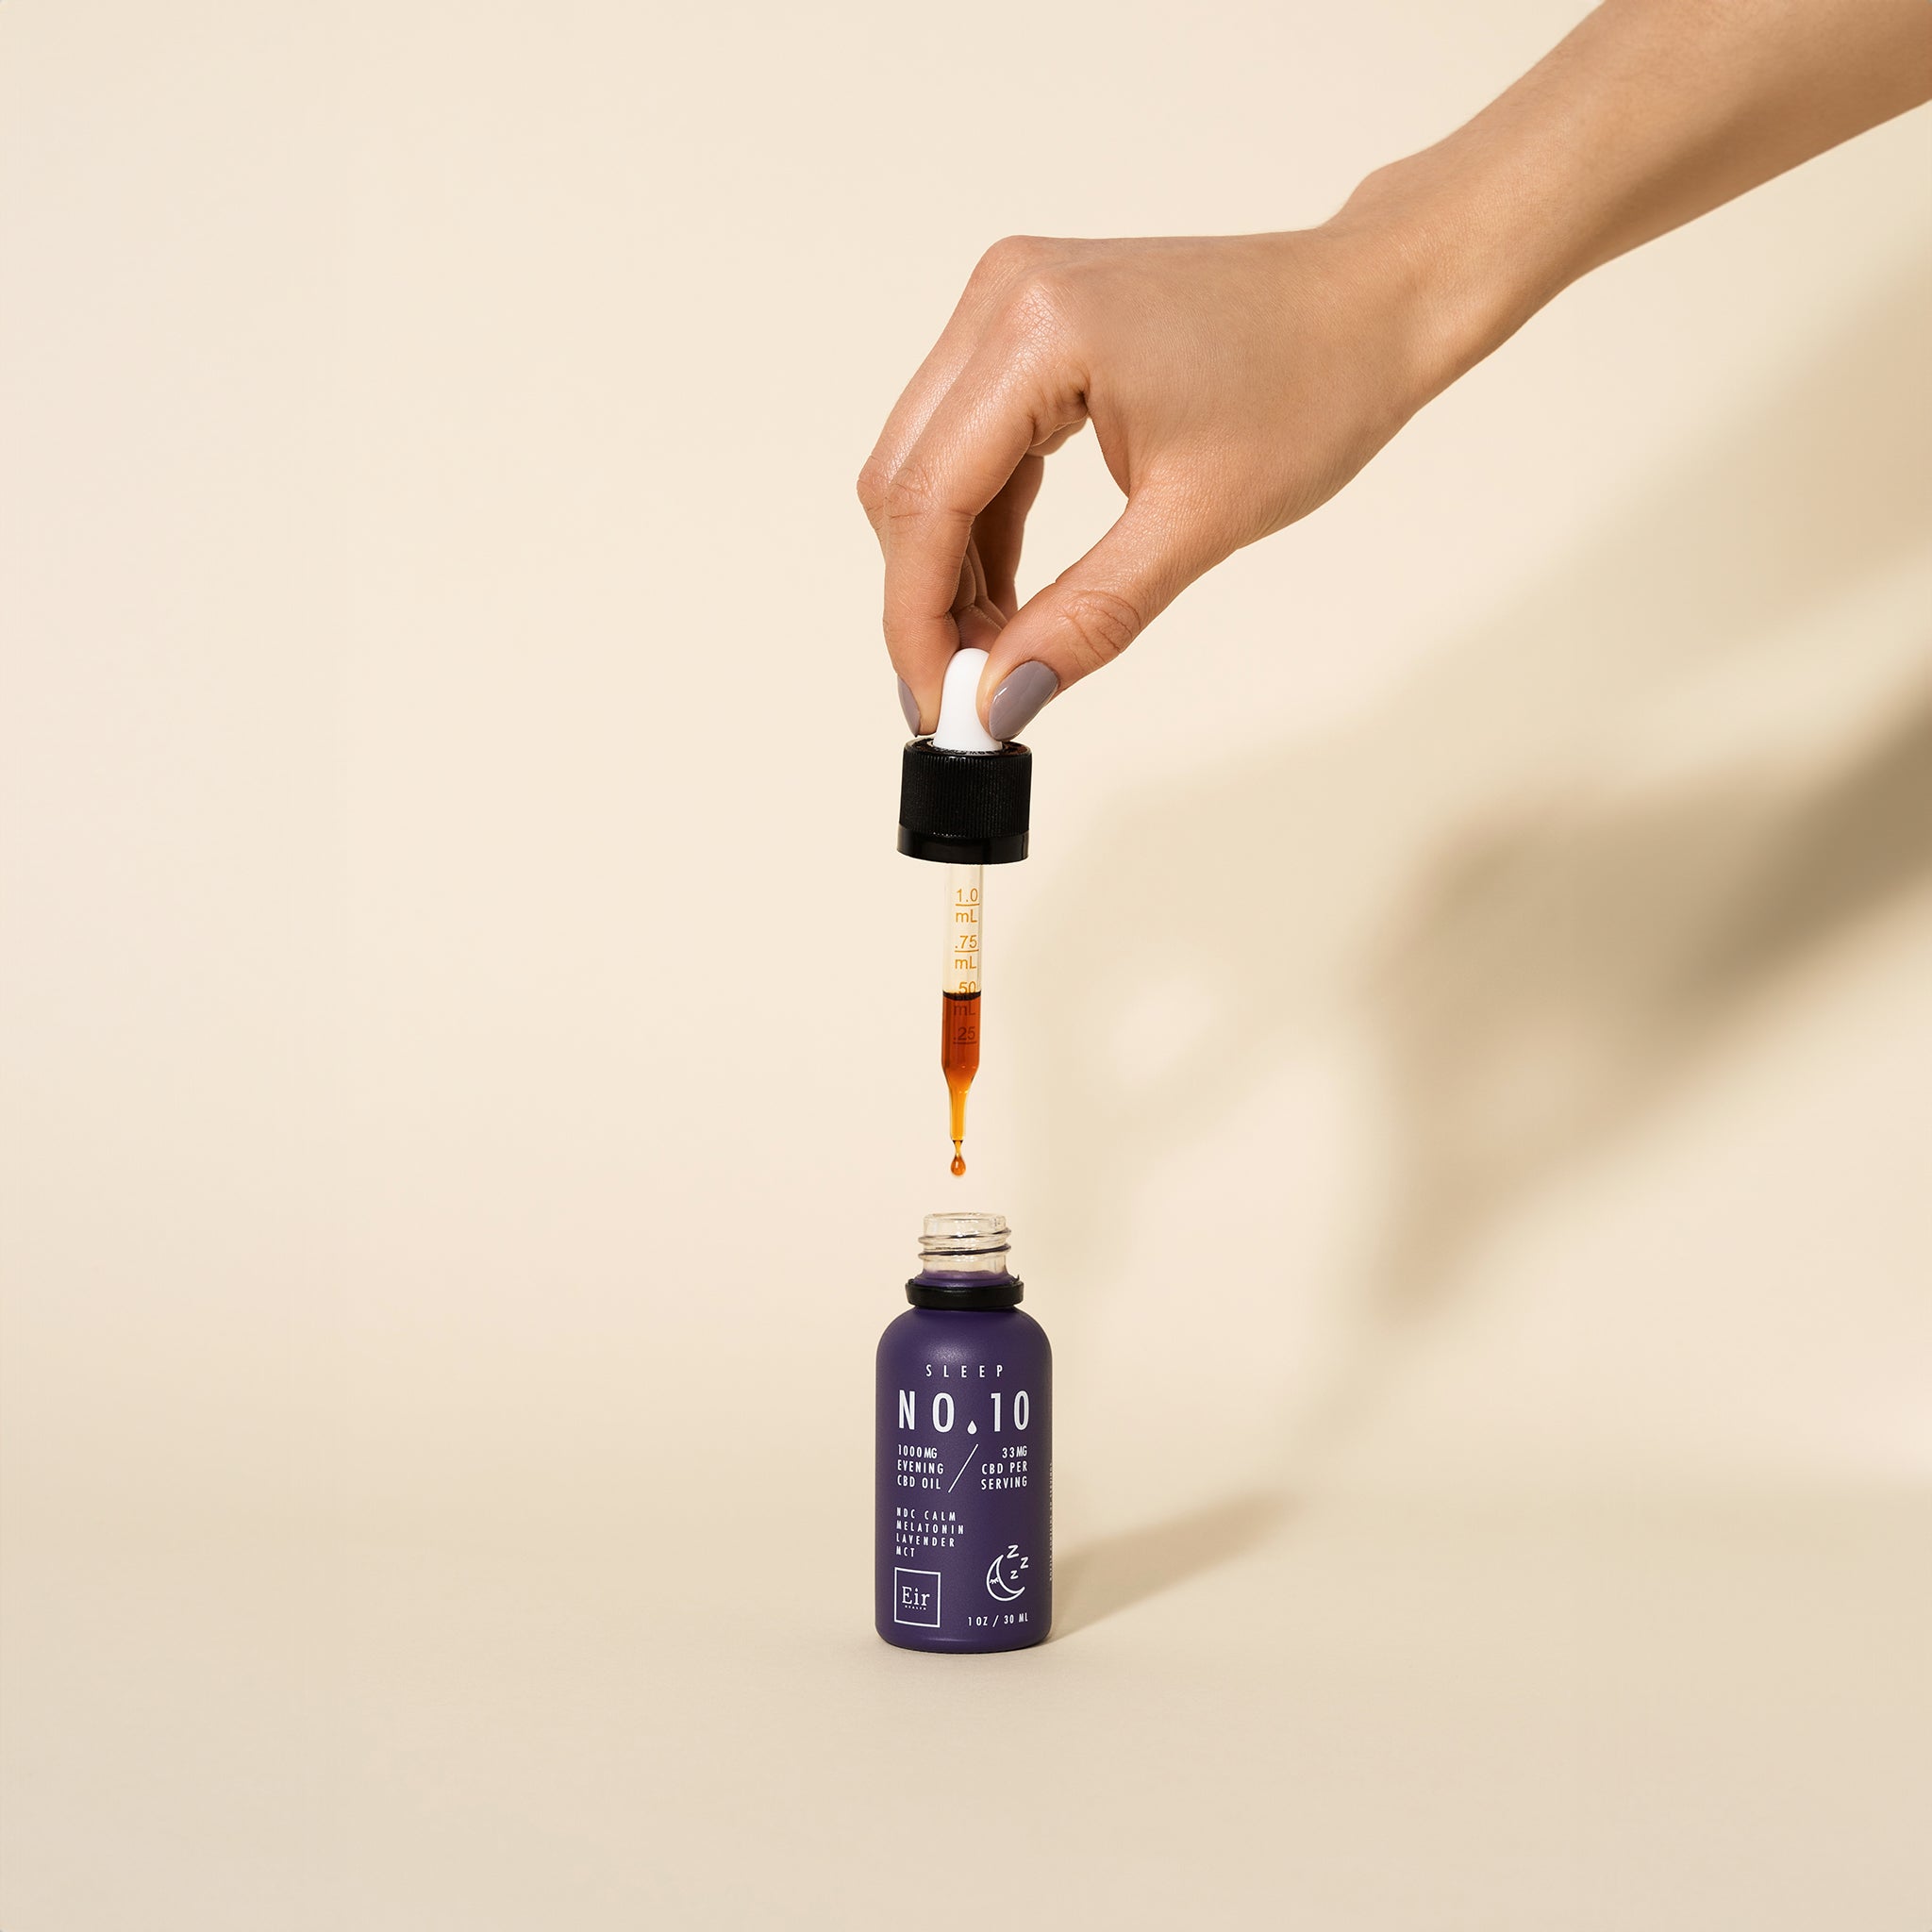 Hand holding a dropper above a purple bottle of Eir No. 10 CBD Oil, with a drop of oil suspended at the end, against a neutral background.